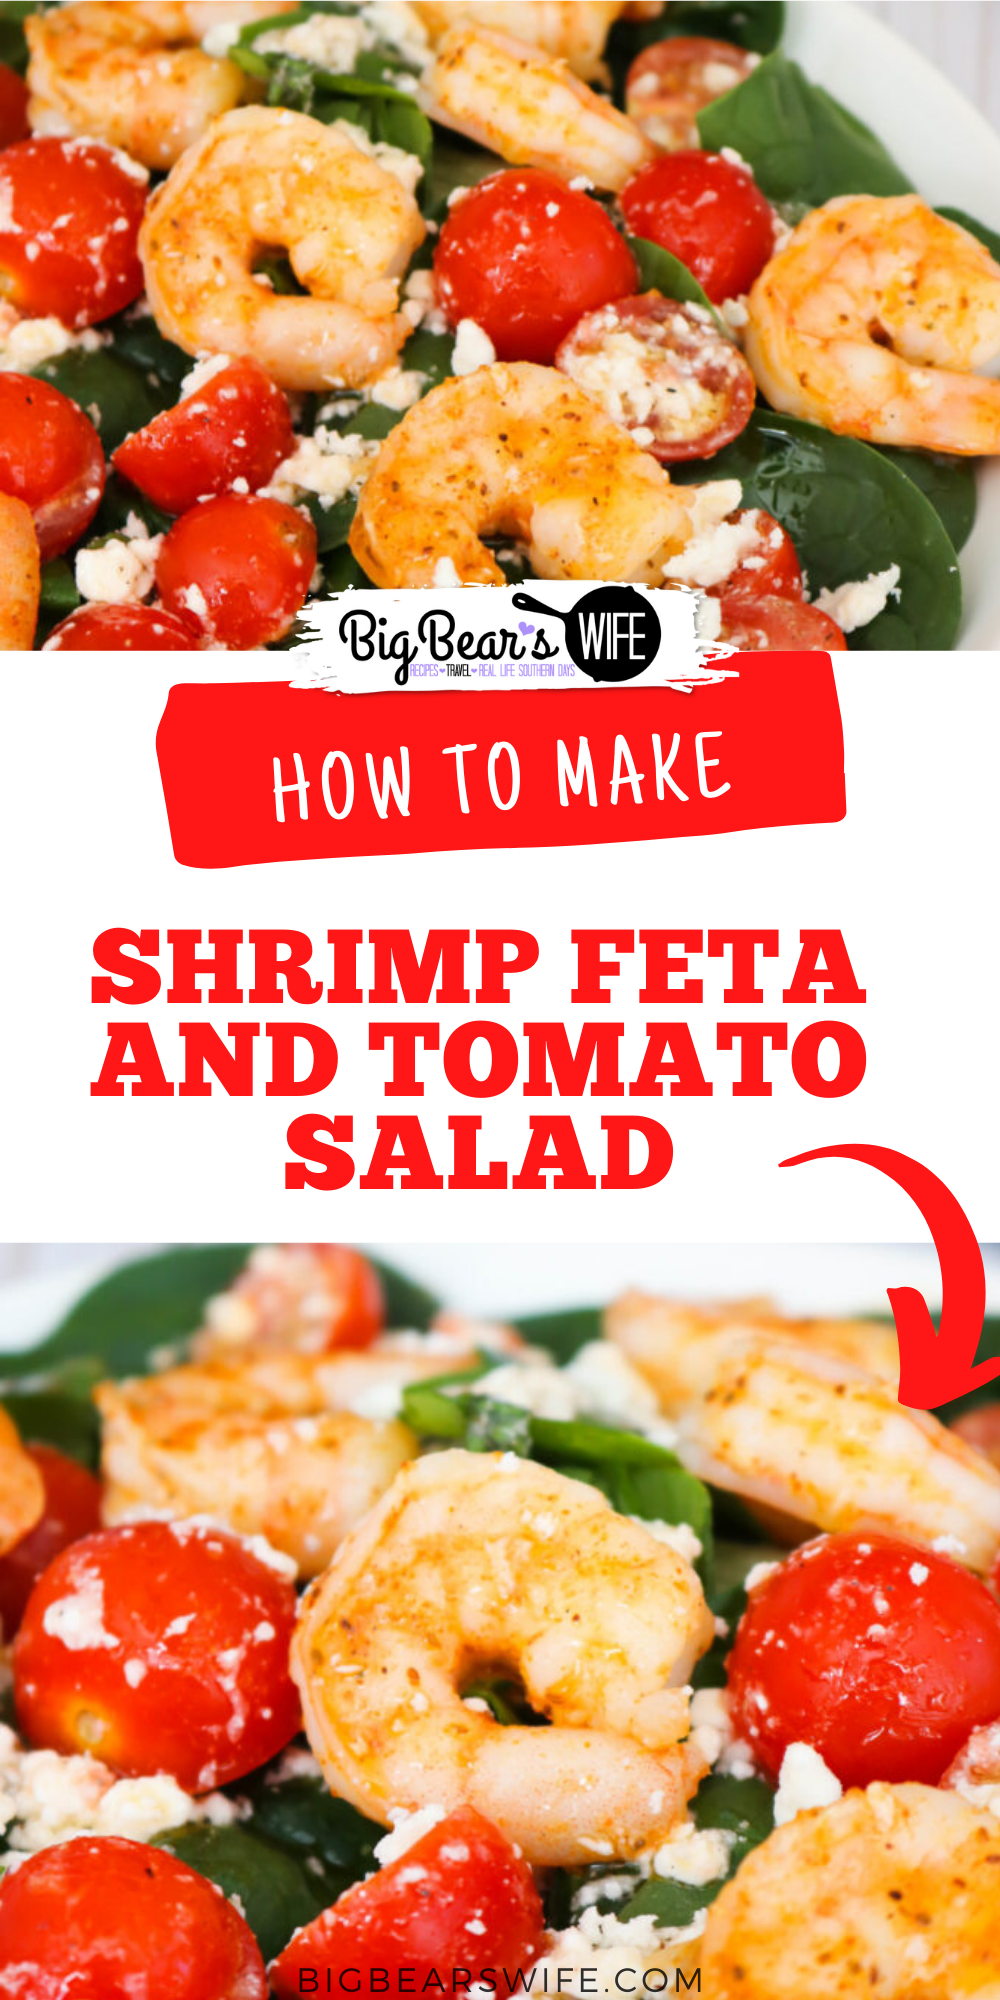 Shrimp Feta and Tomato Salad - Salads don't have to be boring nor do they needs to be loaded down with tons of fatty dressings to be tasty! This Shrimp Feta and Tomato Salad is full of seasoned shrimp, feta cheese, fresh tomatoes and dressed with a wonderful light dressing!  via @bigbearswife